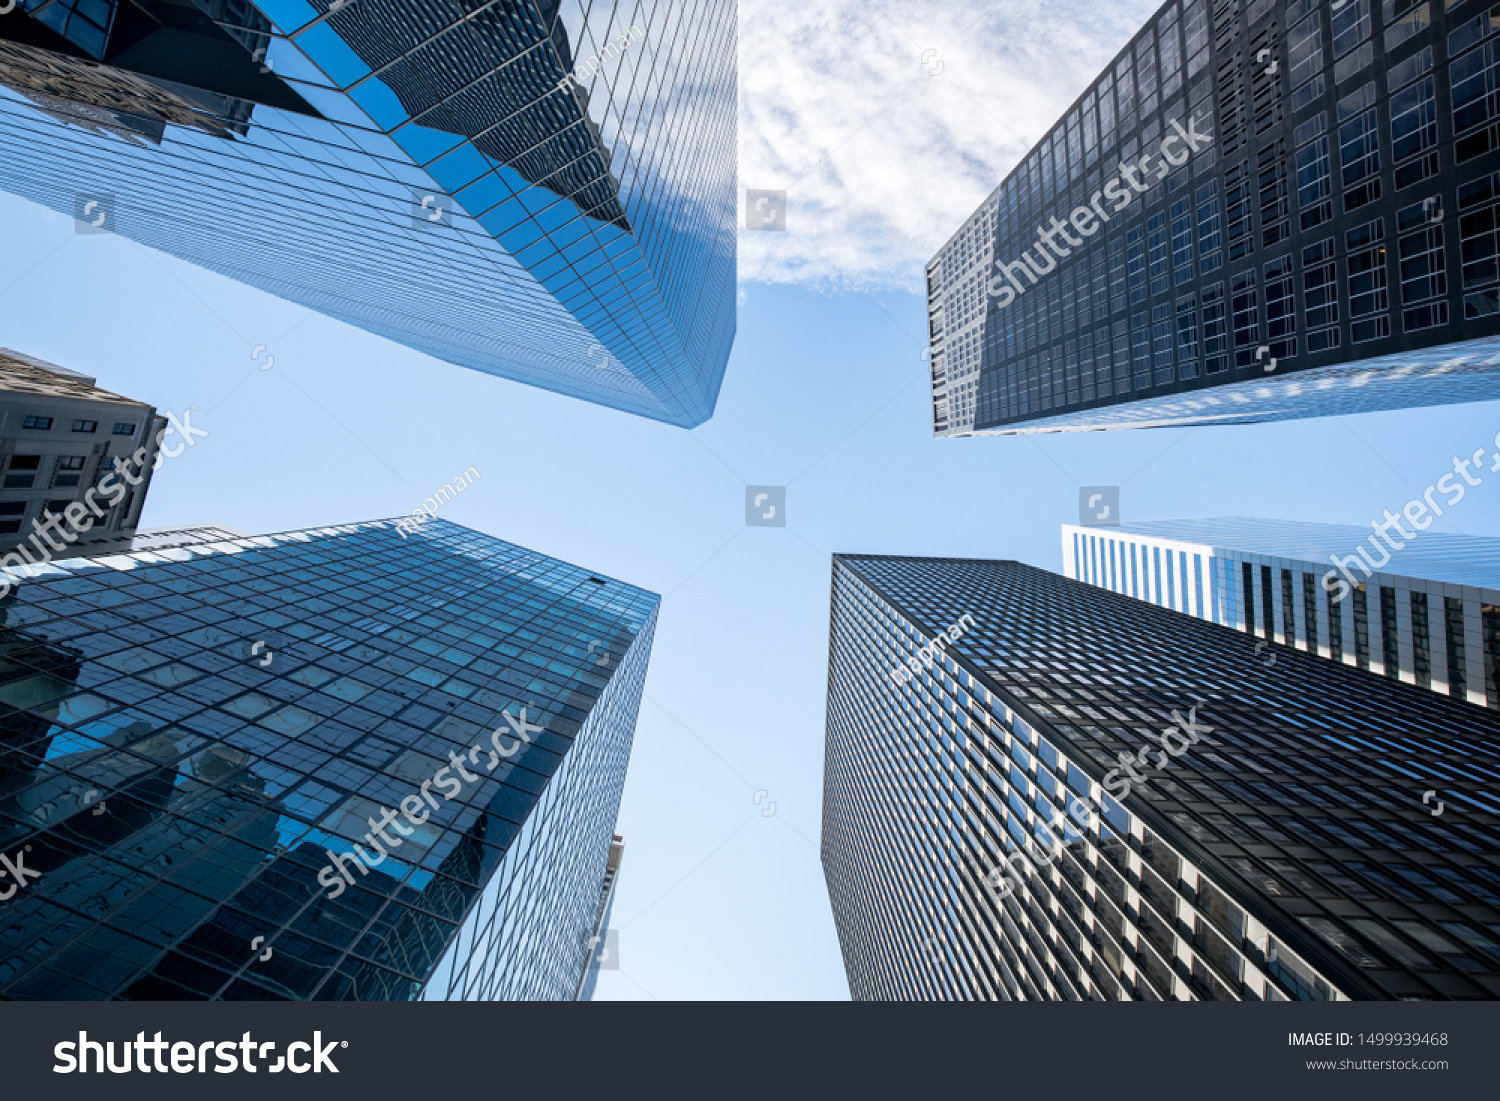 Modern skyscraper buildings in the financial district of Manhattan, New York City, USA #1499939468